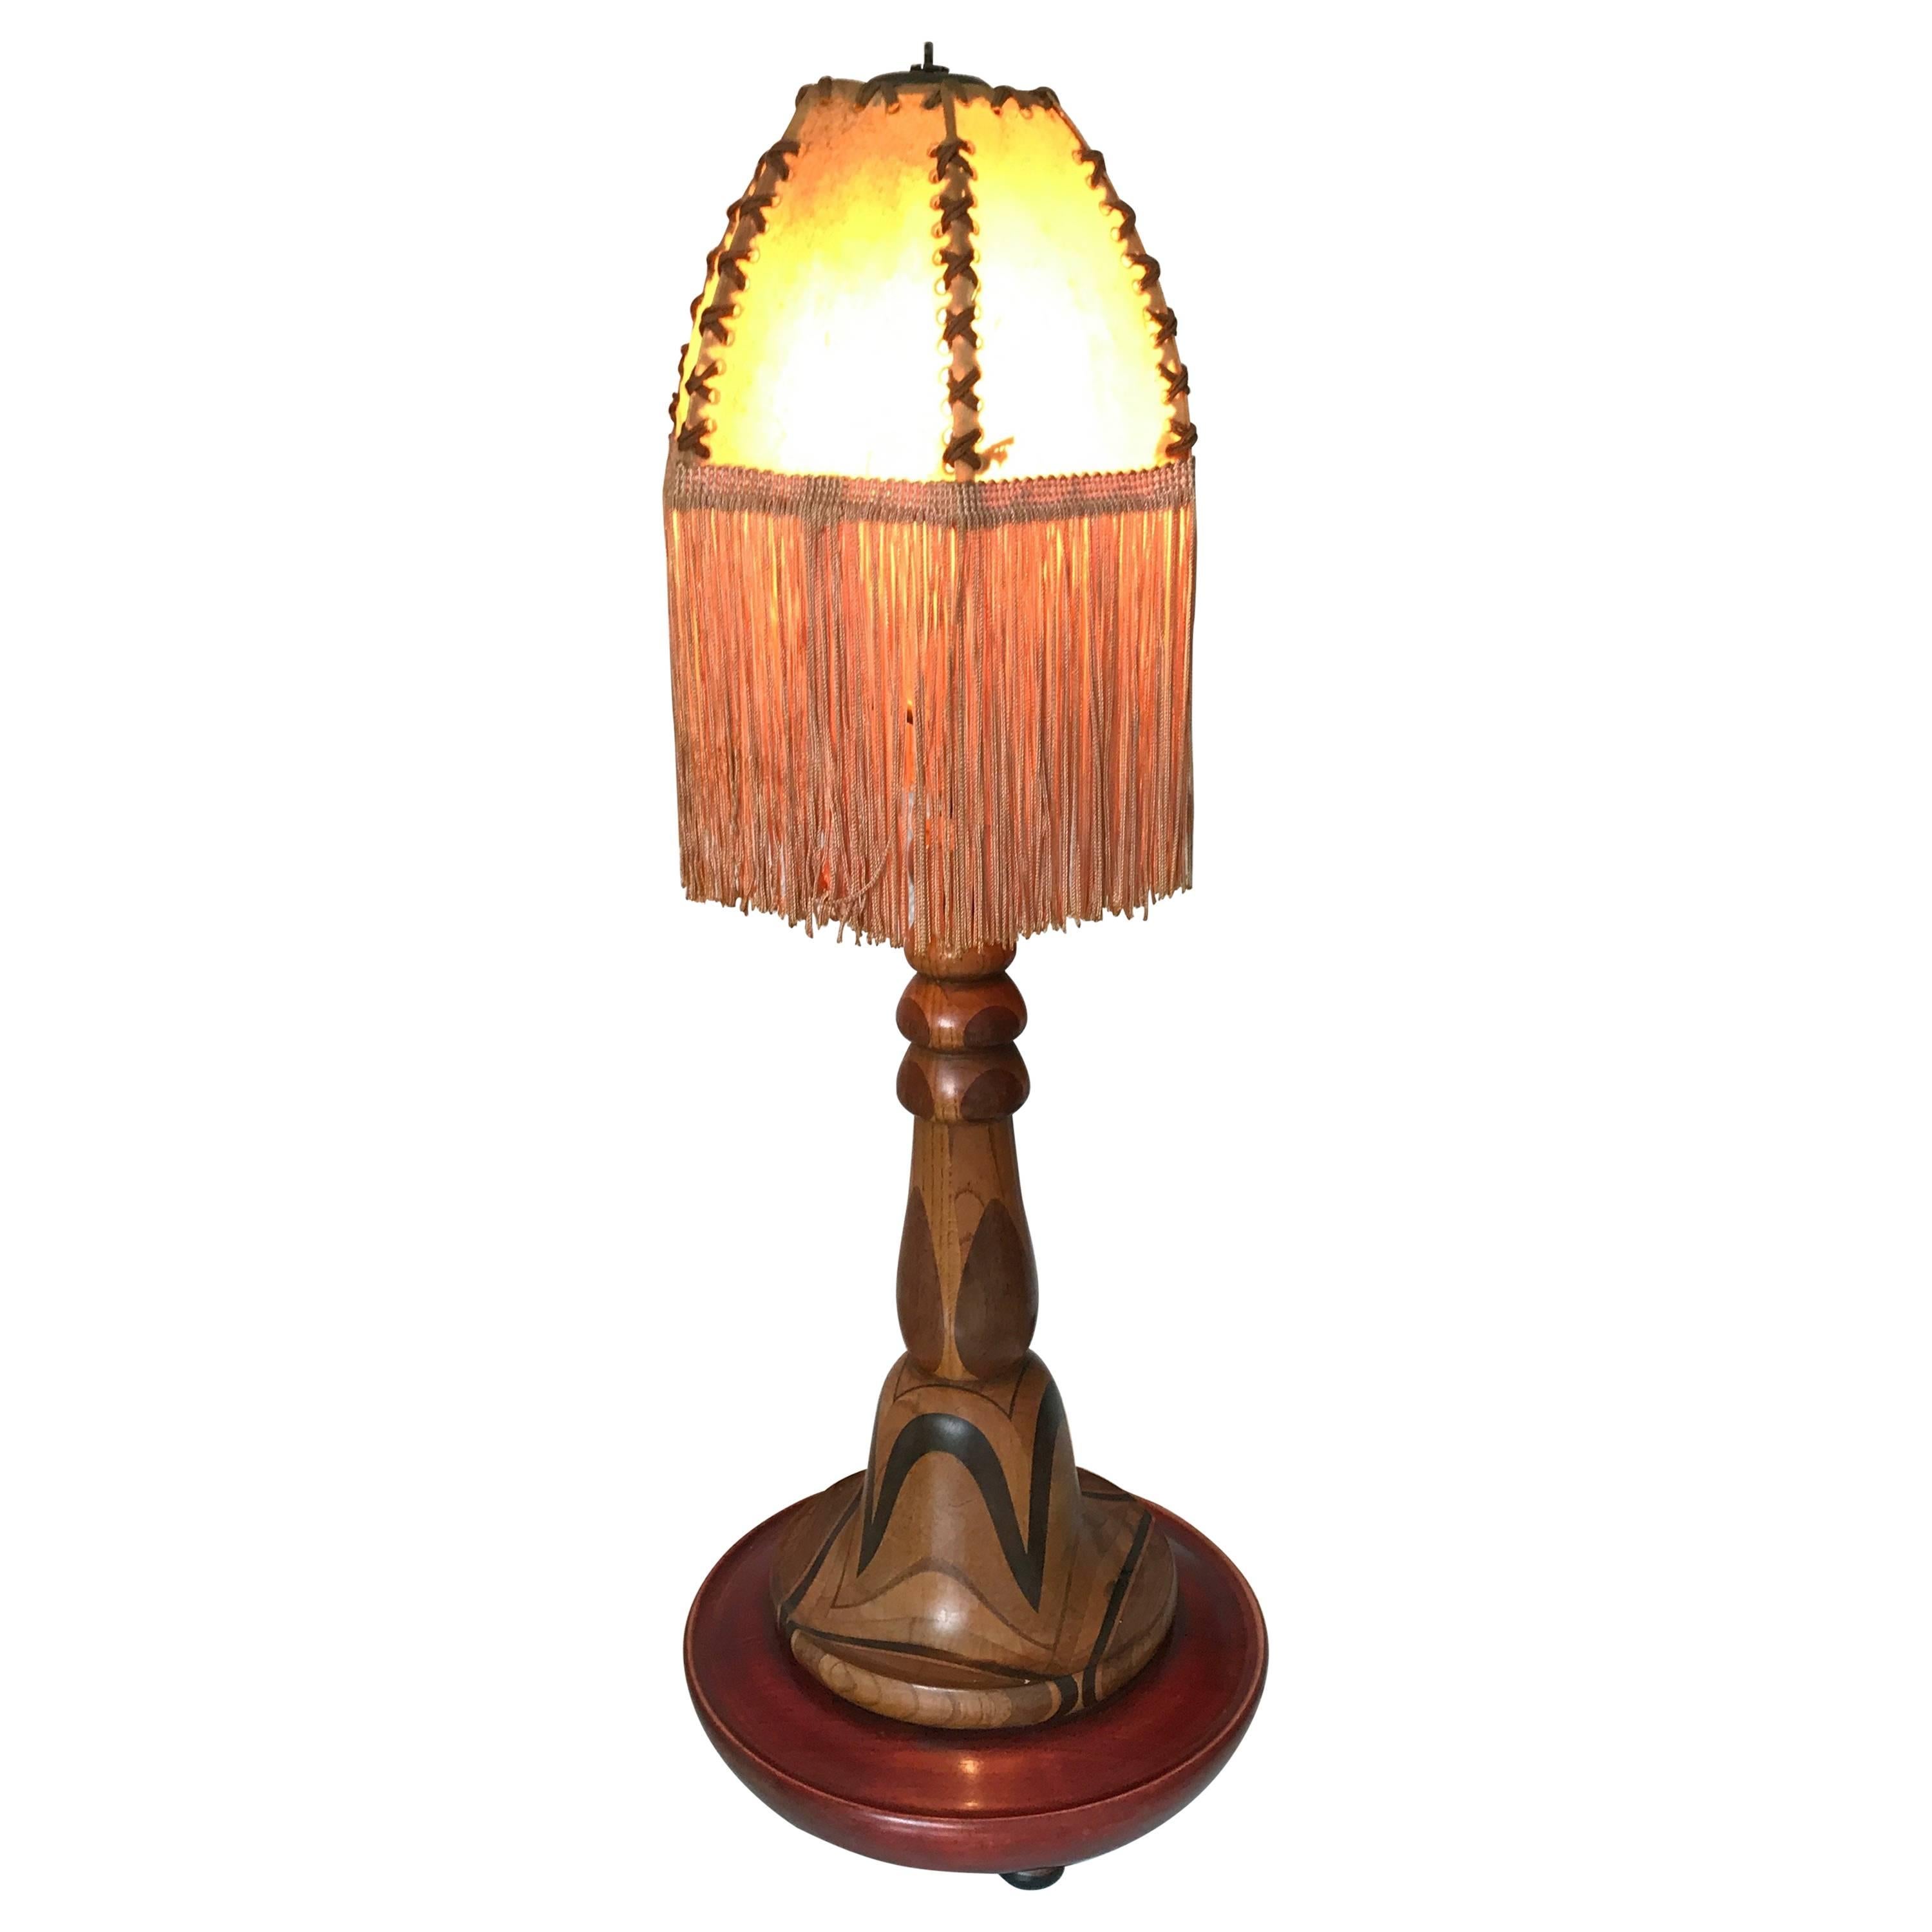 Rare and Hand-Crafted Art Deco Desk or Table Lamp with Stunning Wood Motifs